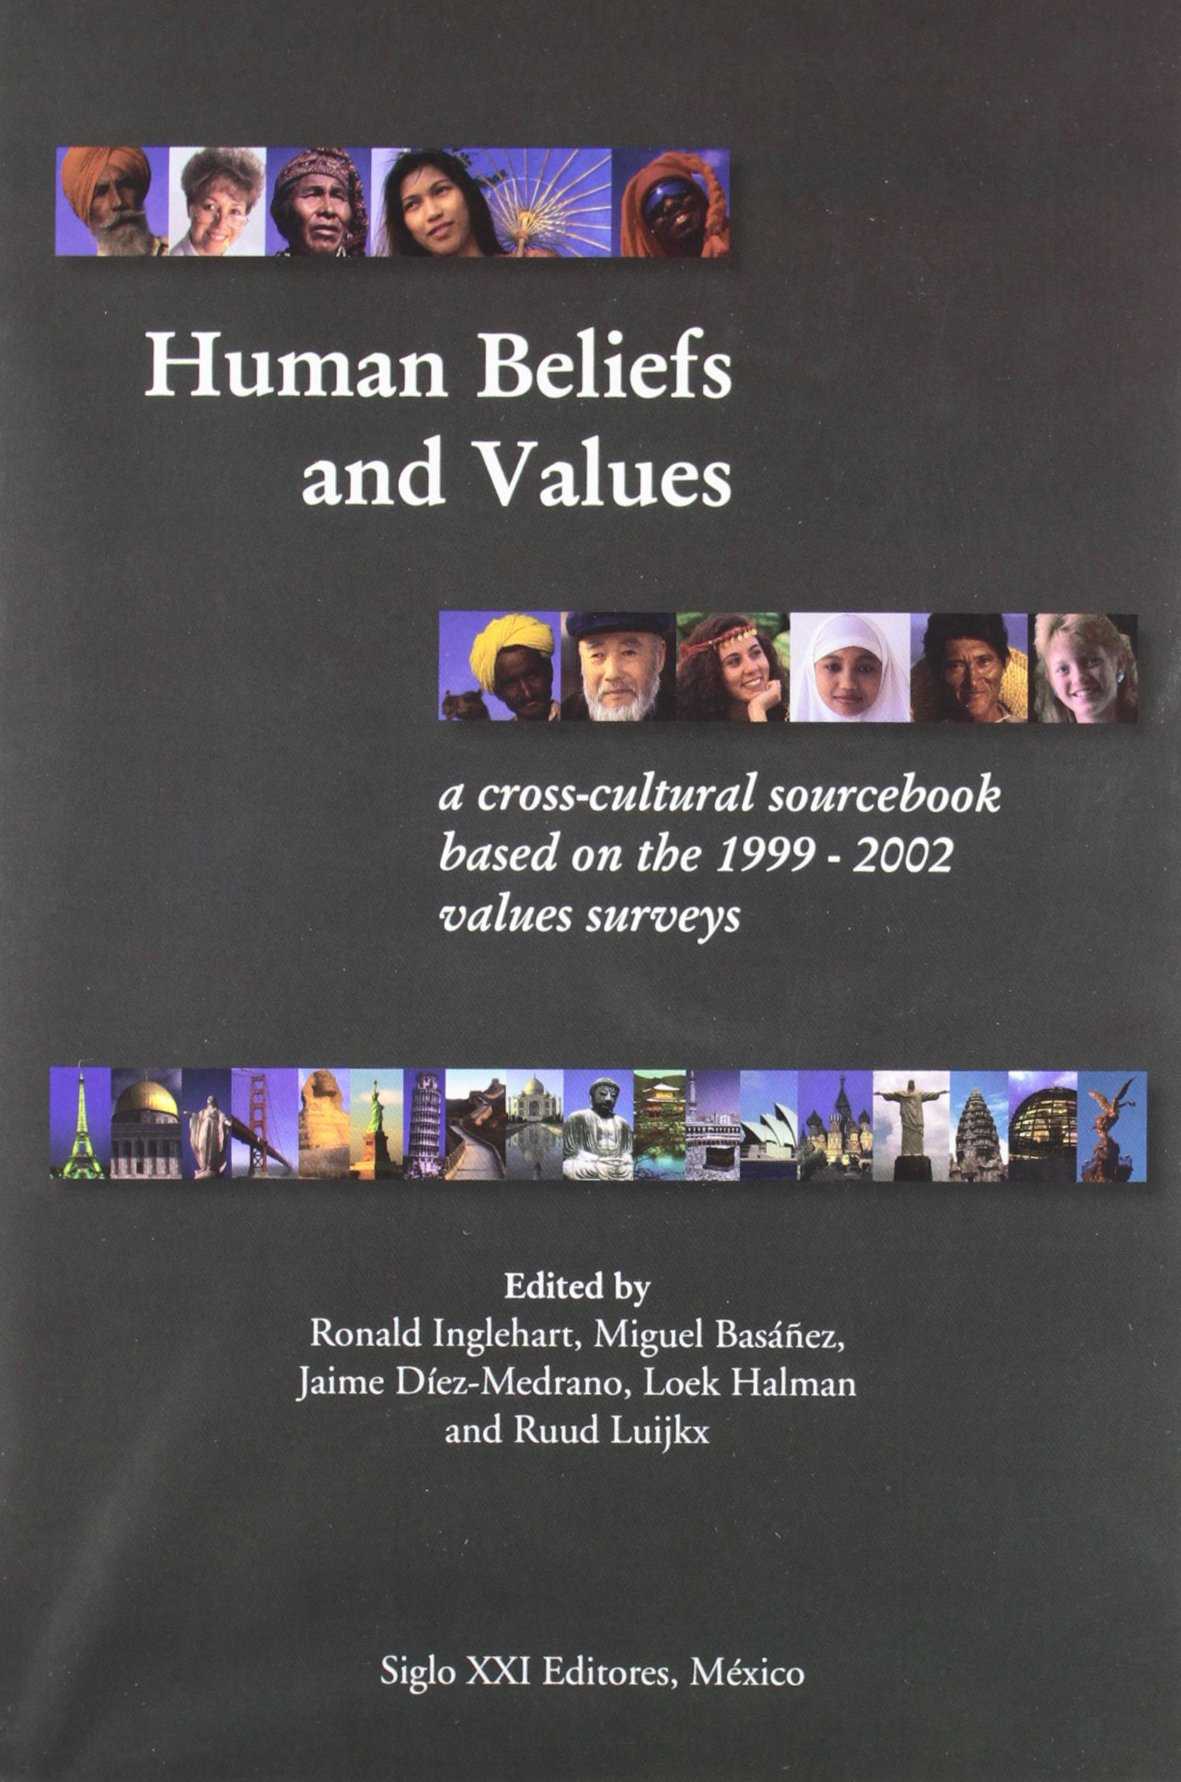 Human beliefs and values